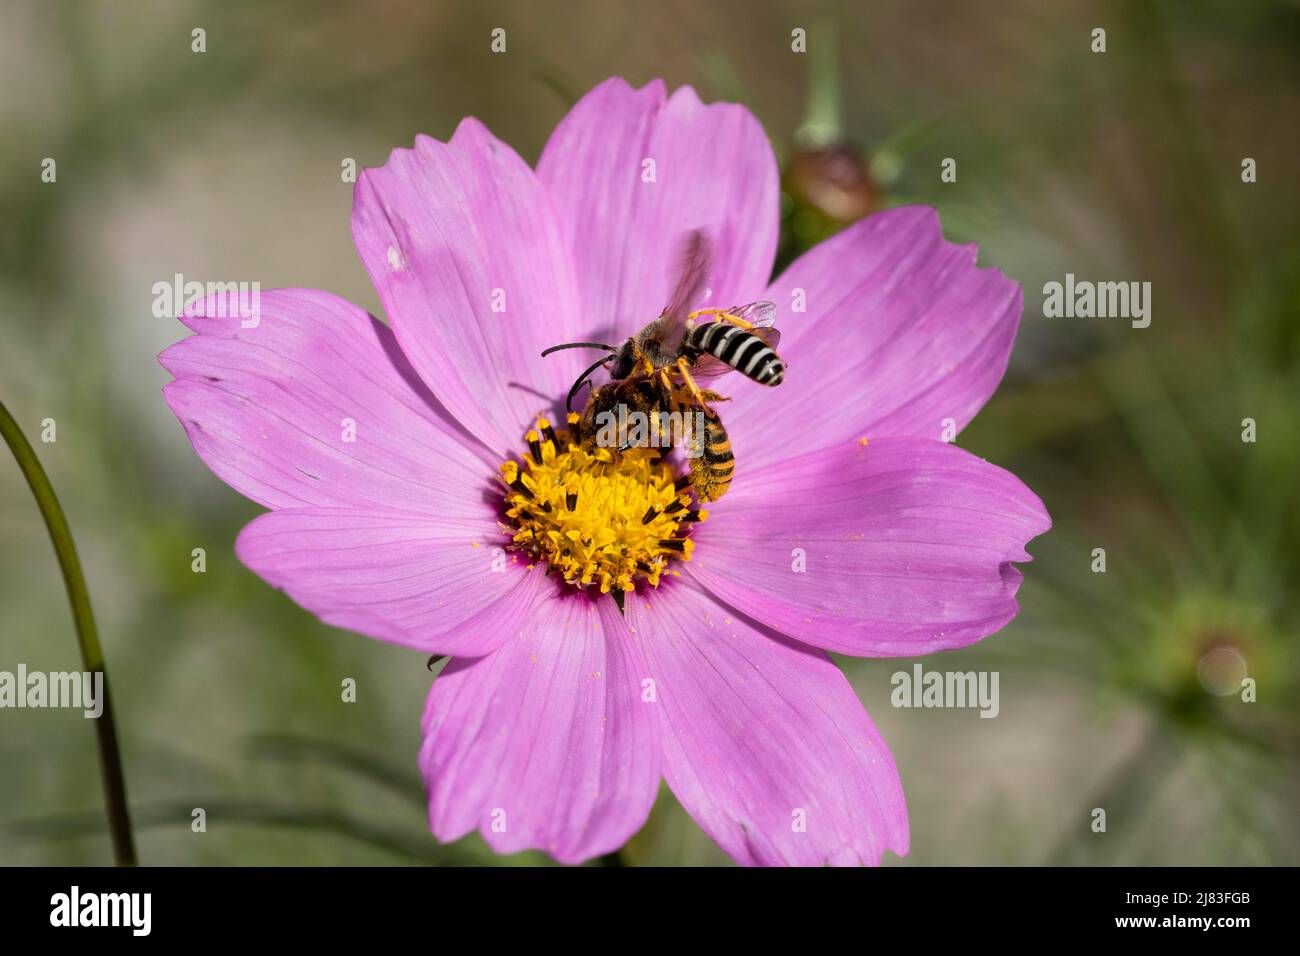 Yellow-banded furrowing bee (Halictus scabiosa), male flying at female, chinese anemone (Anemone hupehensis), Solothurn, Switzerland-173543-3 Stock Photo